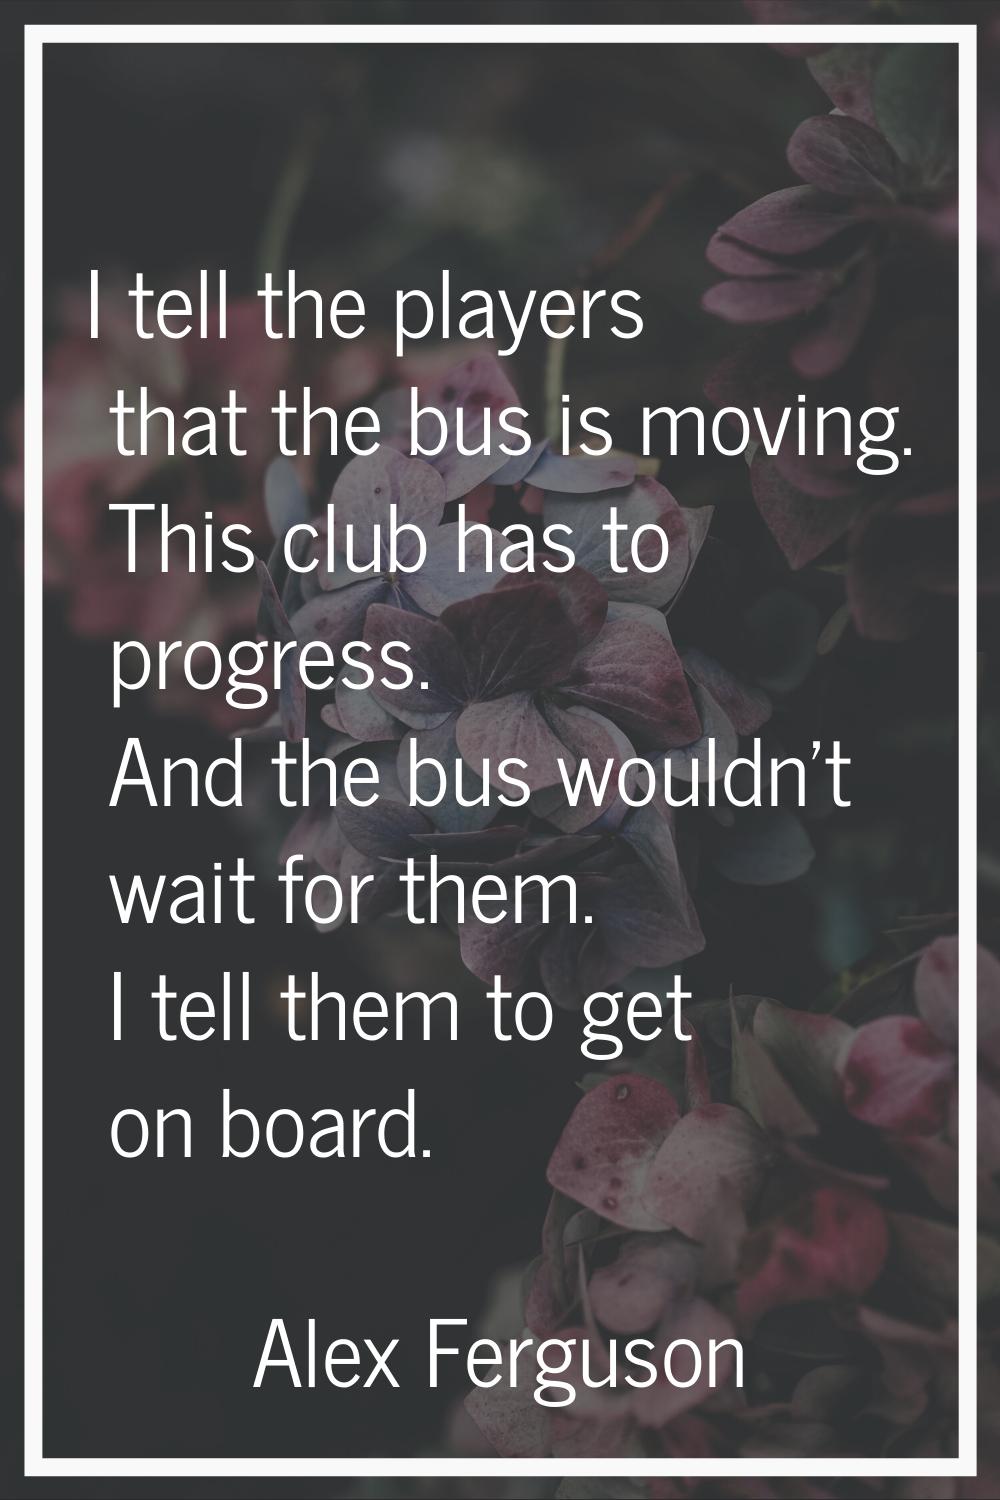 I tell the players that the bus is moving. This club has to progress. And the bus wouldn't wait for